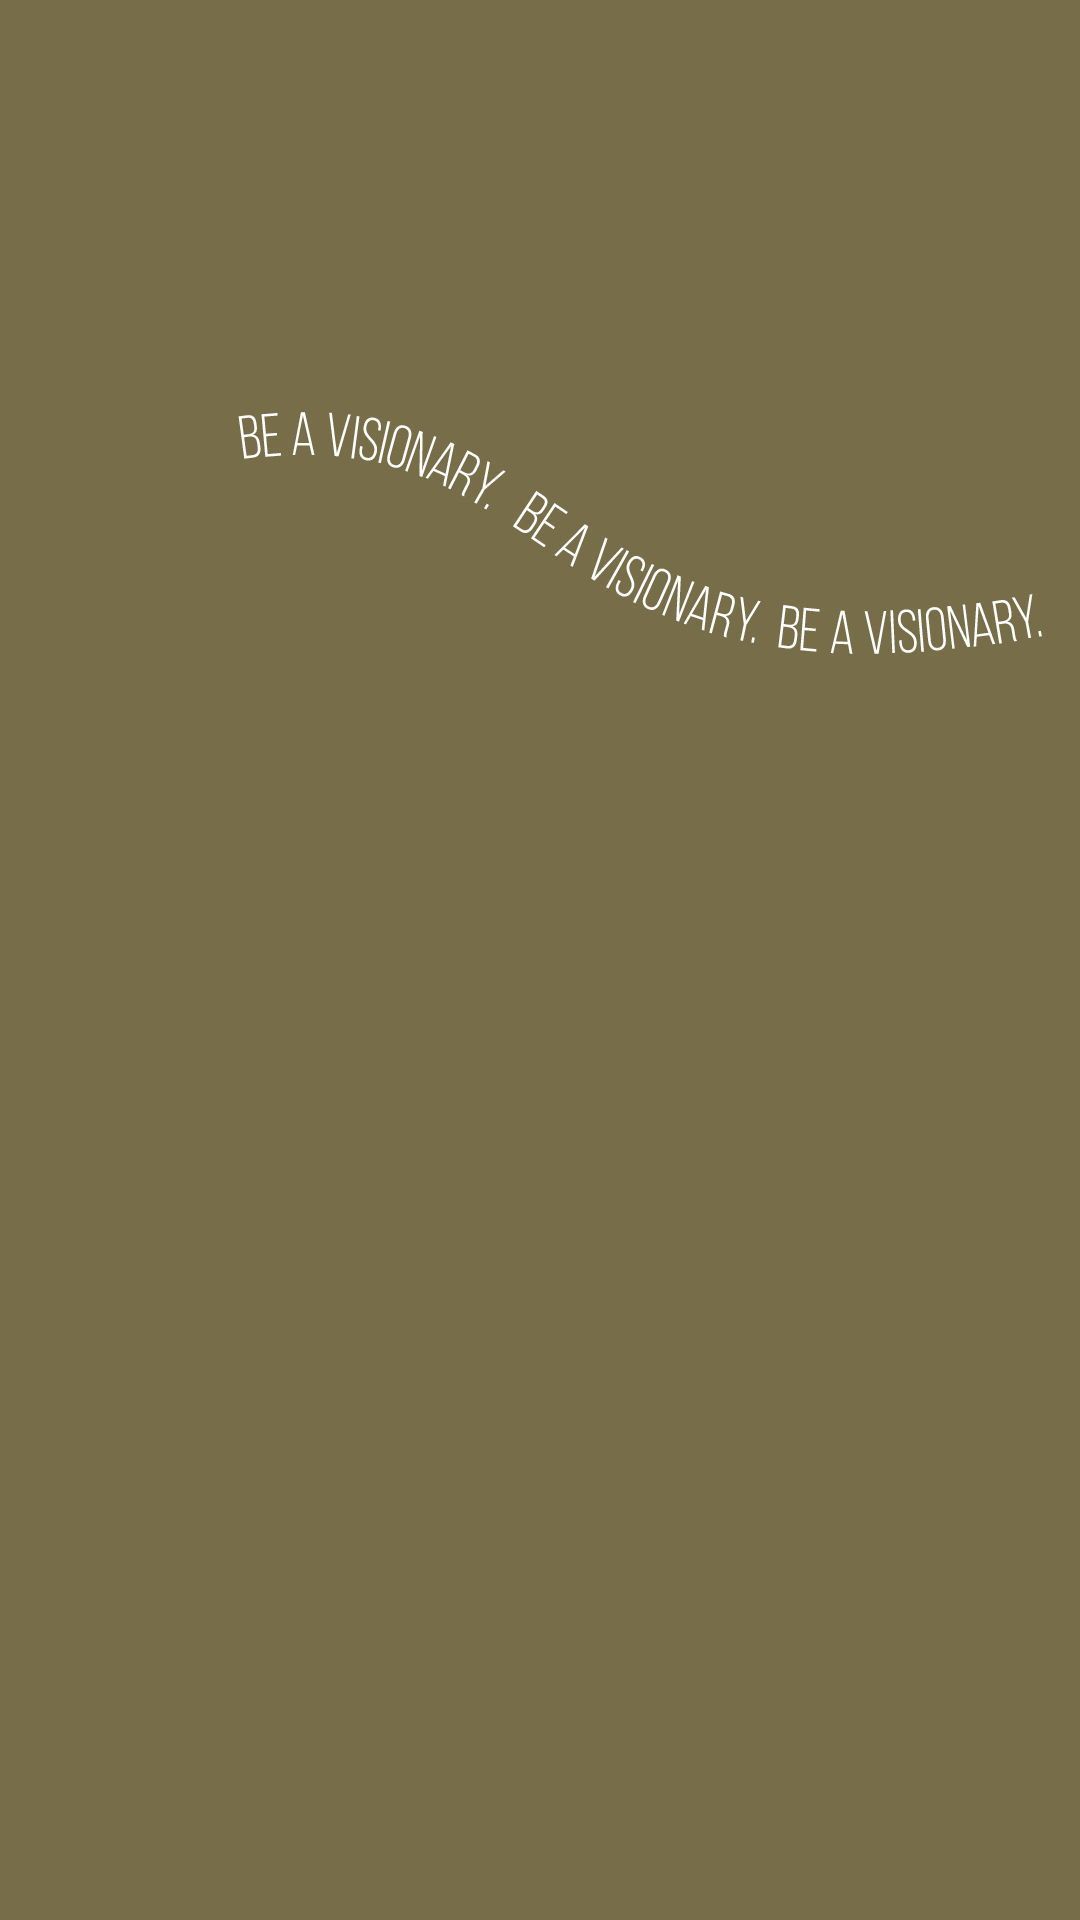 The Official Gymshark Wallpaper. Be A Visionary T Shirt, Washed Khaki/ White. #Gymshark #Wallpaper #iPhone #Background #Patter. Visionary, Gymshark, Washed